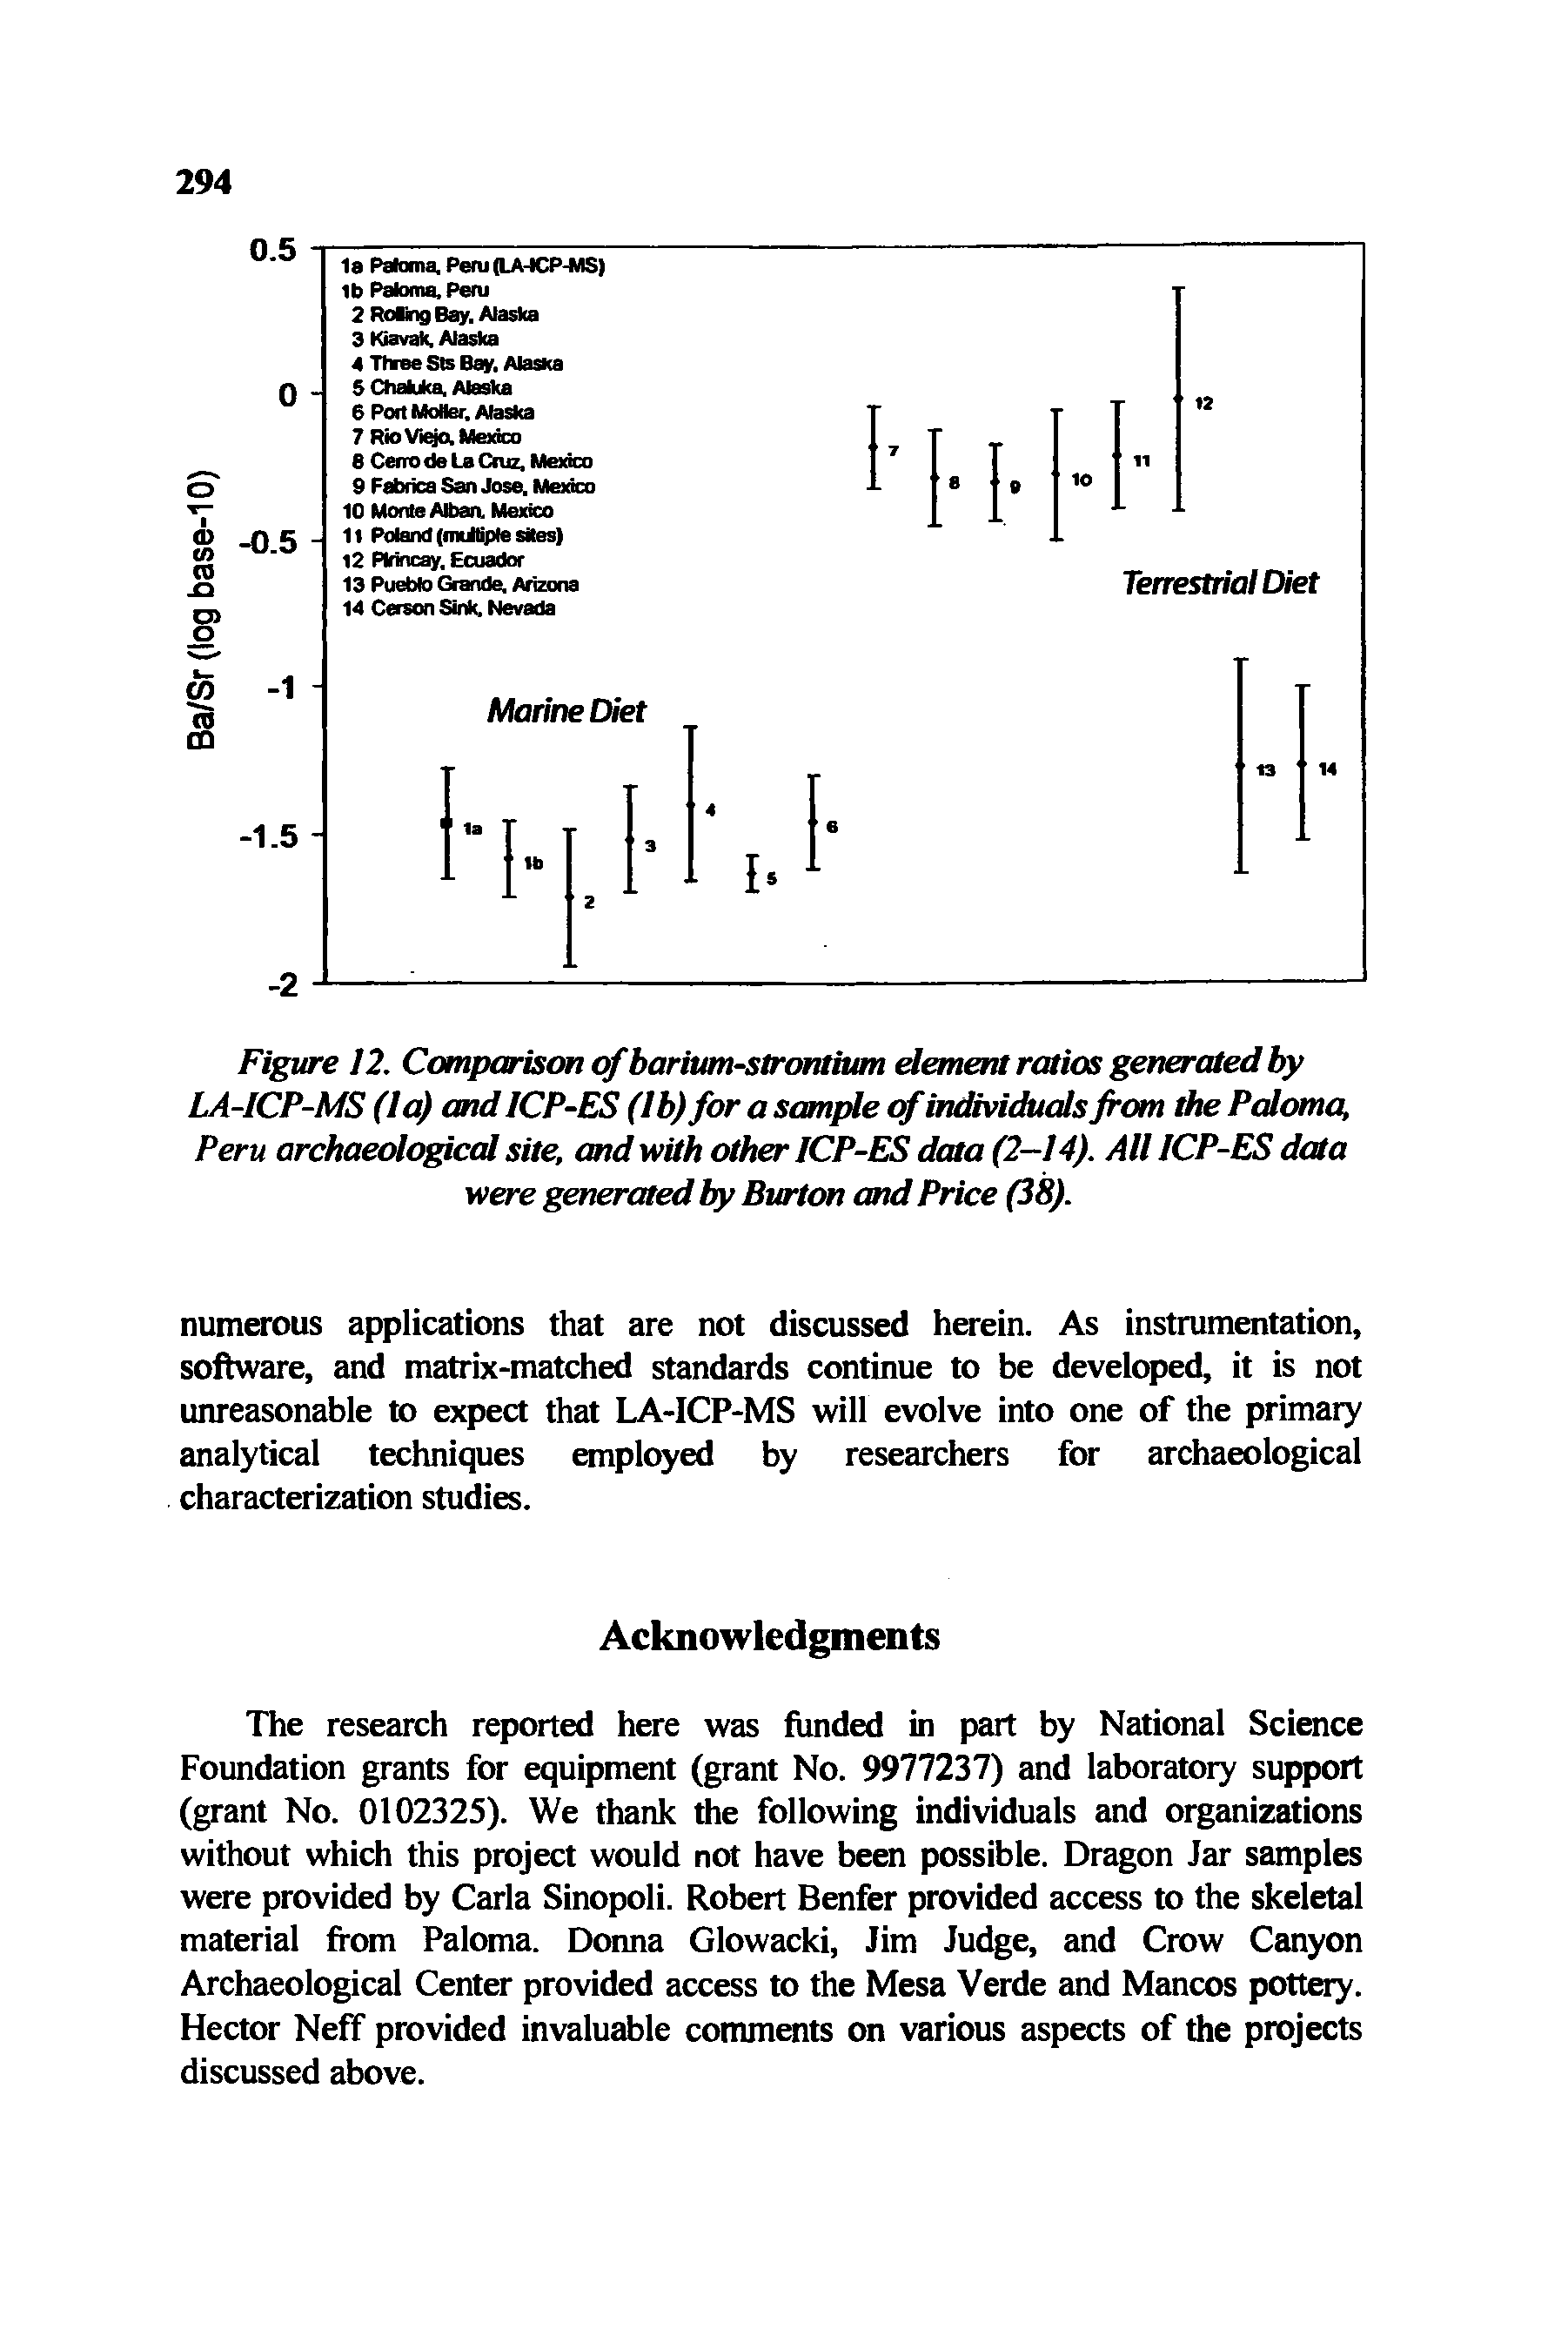 Figure 12. Comparison of barium-strontium element ratios generated by LA-ICP-MS (la) and ICP-ES (lb) for a sample of individuals from the Paloma, Peru archaeological site, and with other ICP-ES data (2-14). All ICP-ES data were generated by Burton and Price (38).